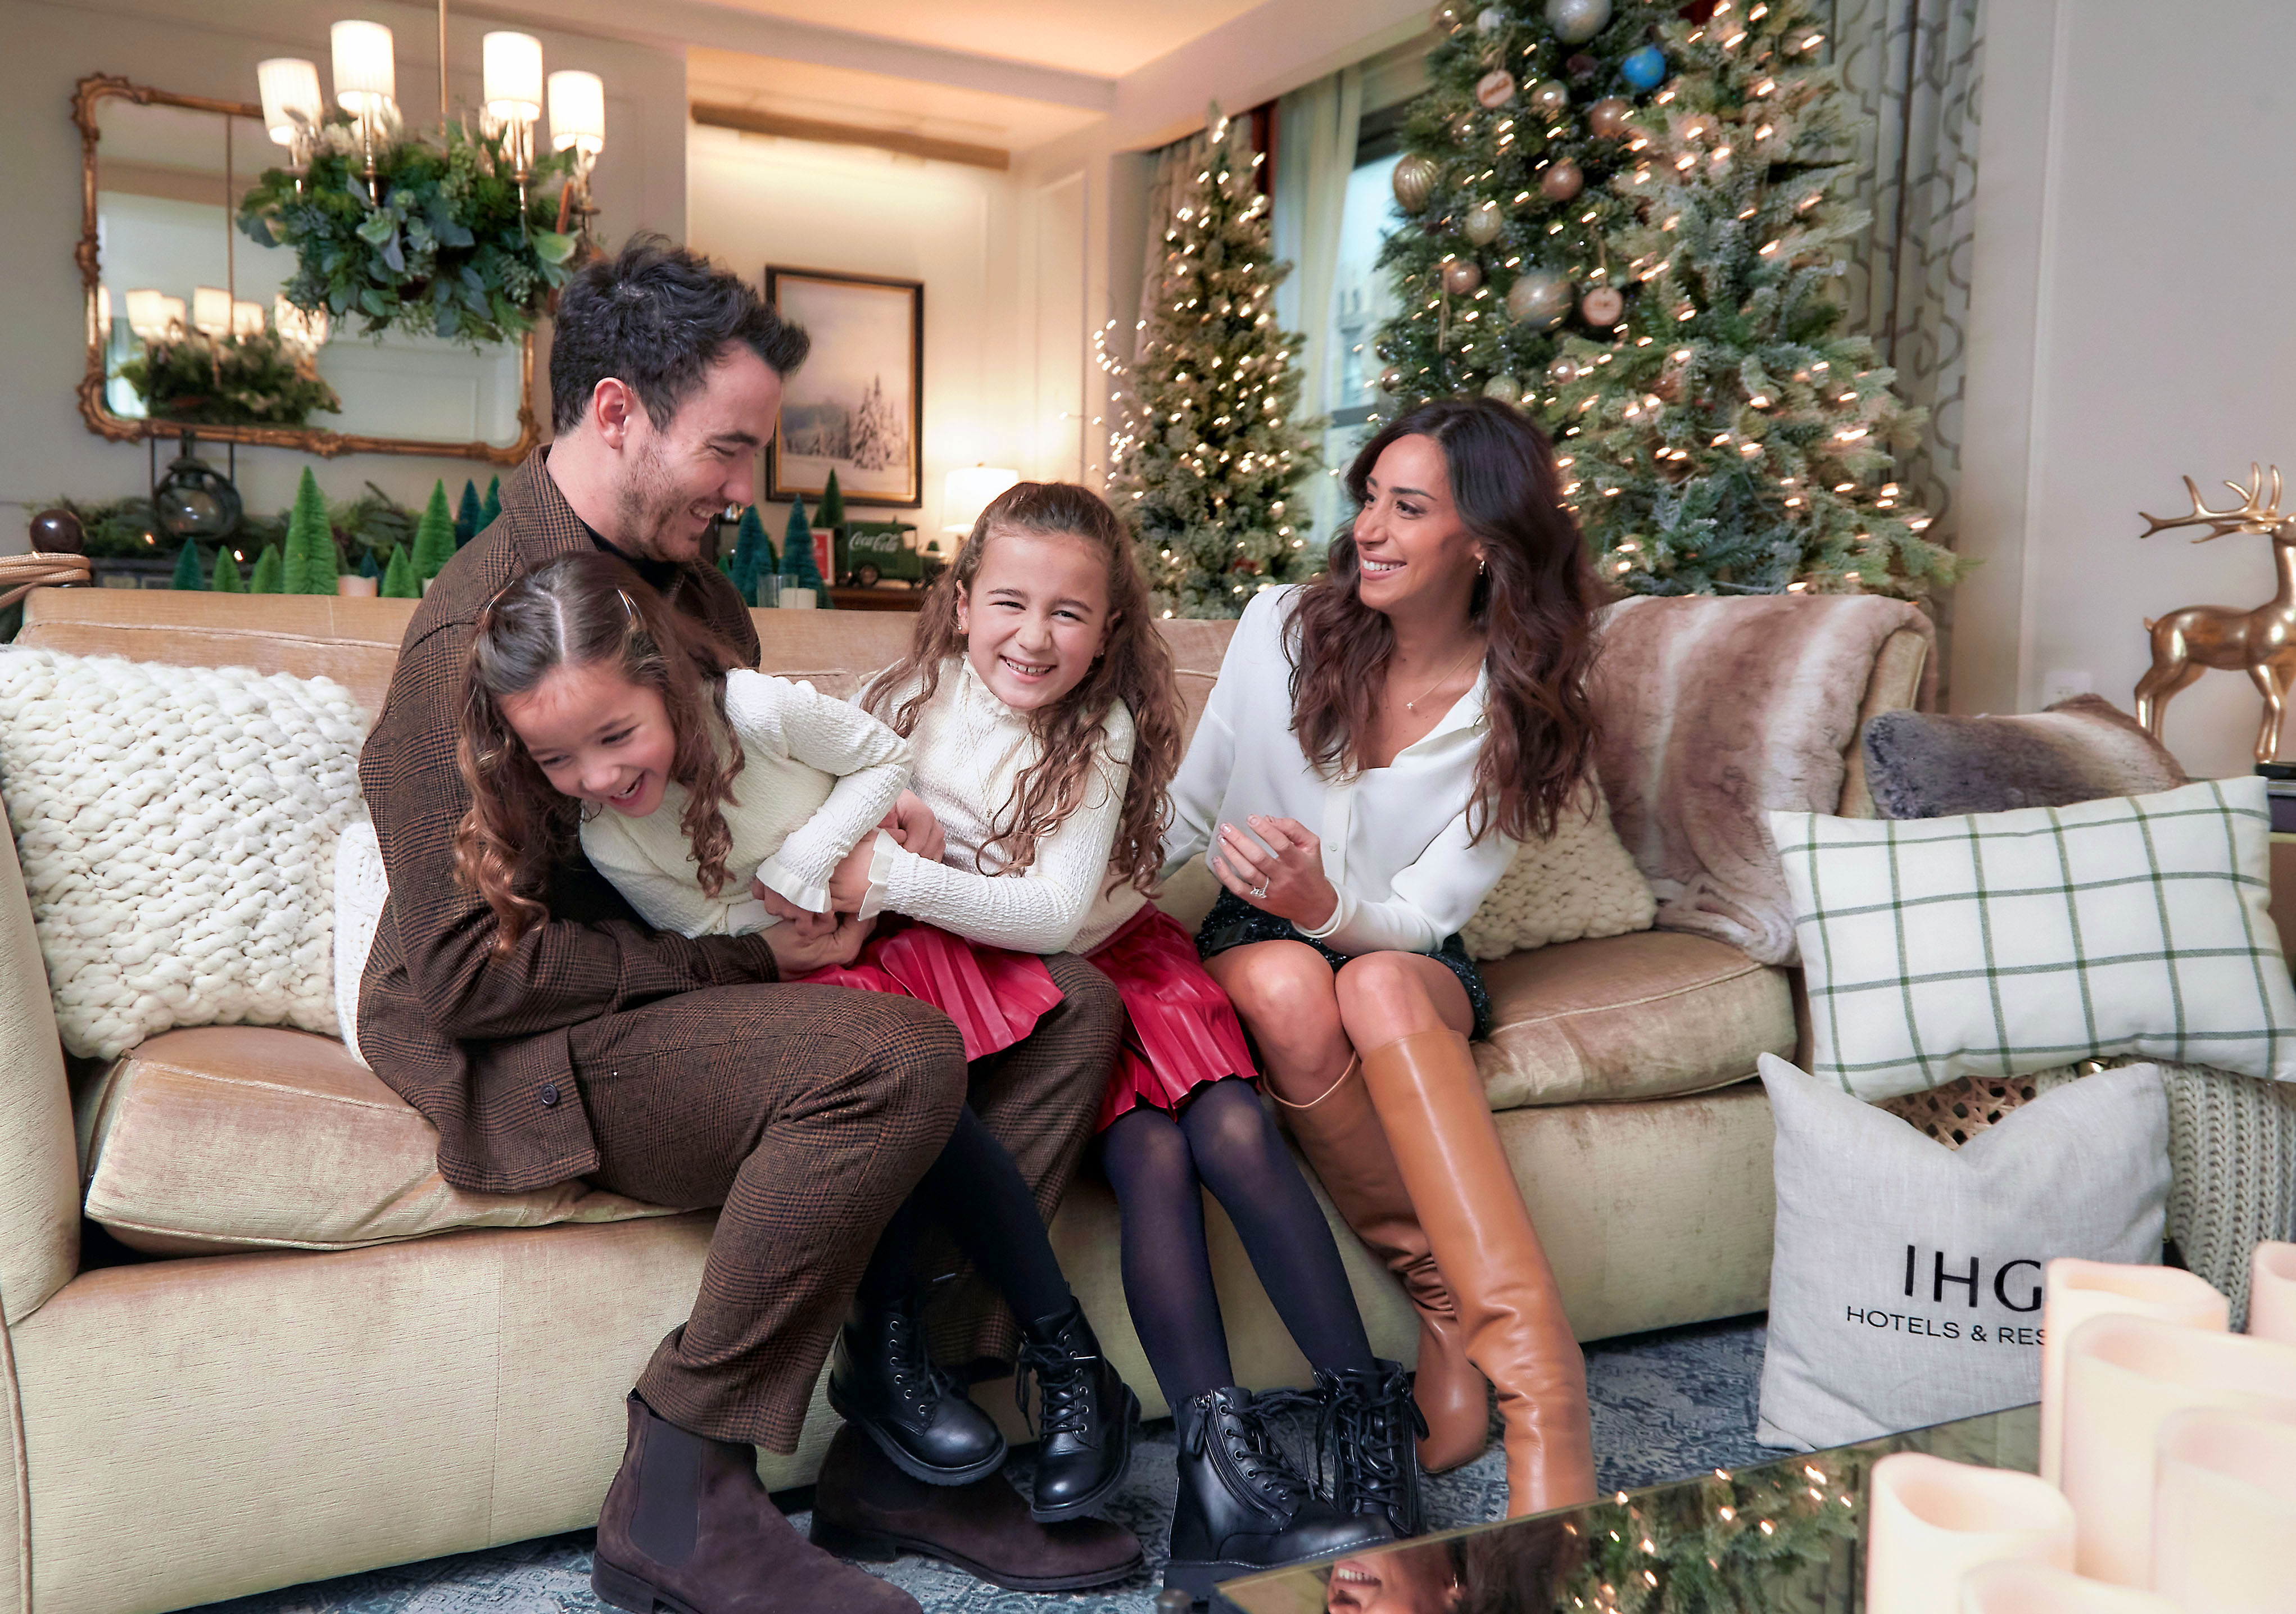 Celeb Families Picking, Decorating Christmas Trees in 2021: Photos